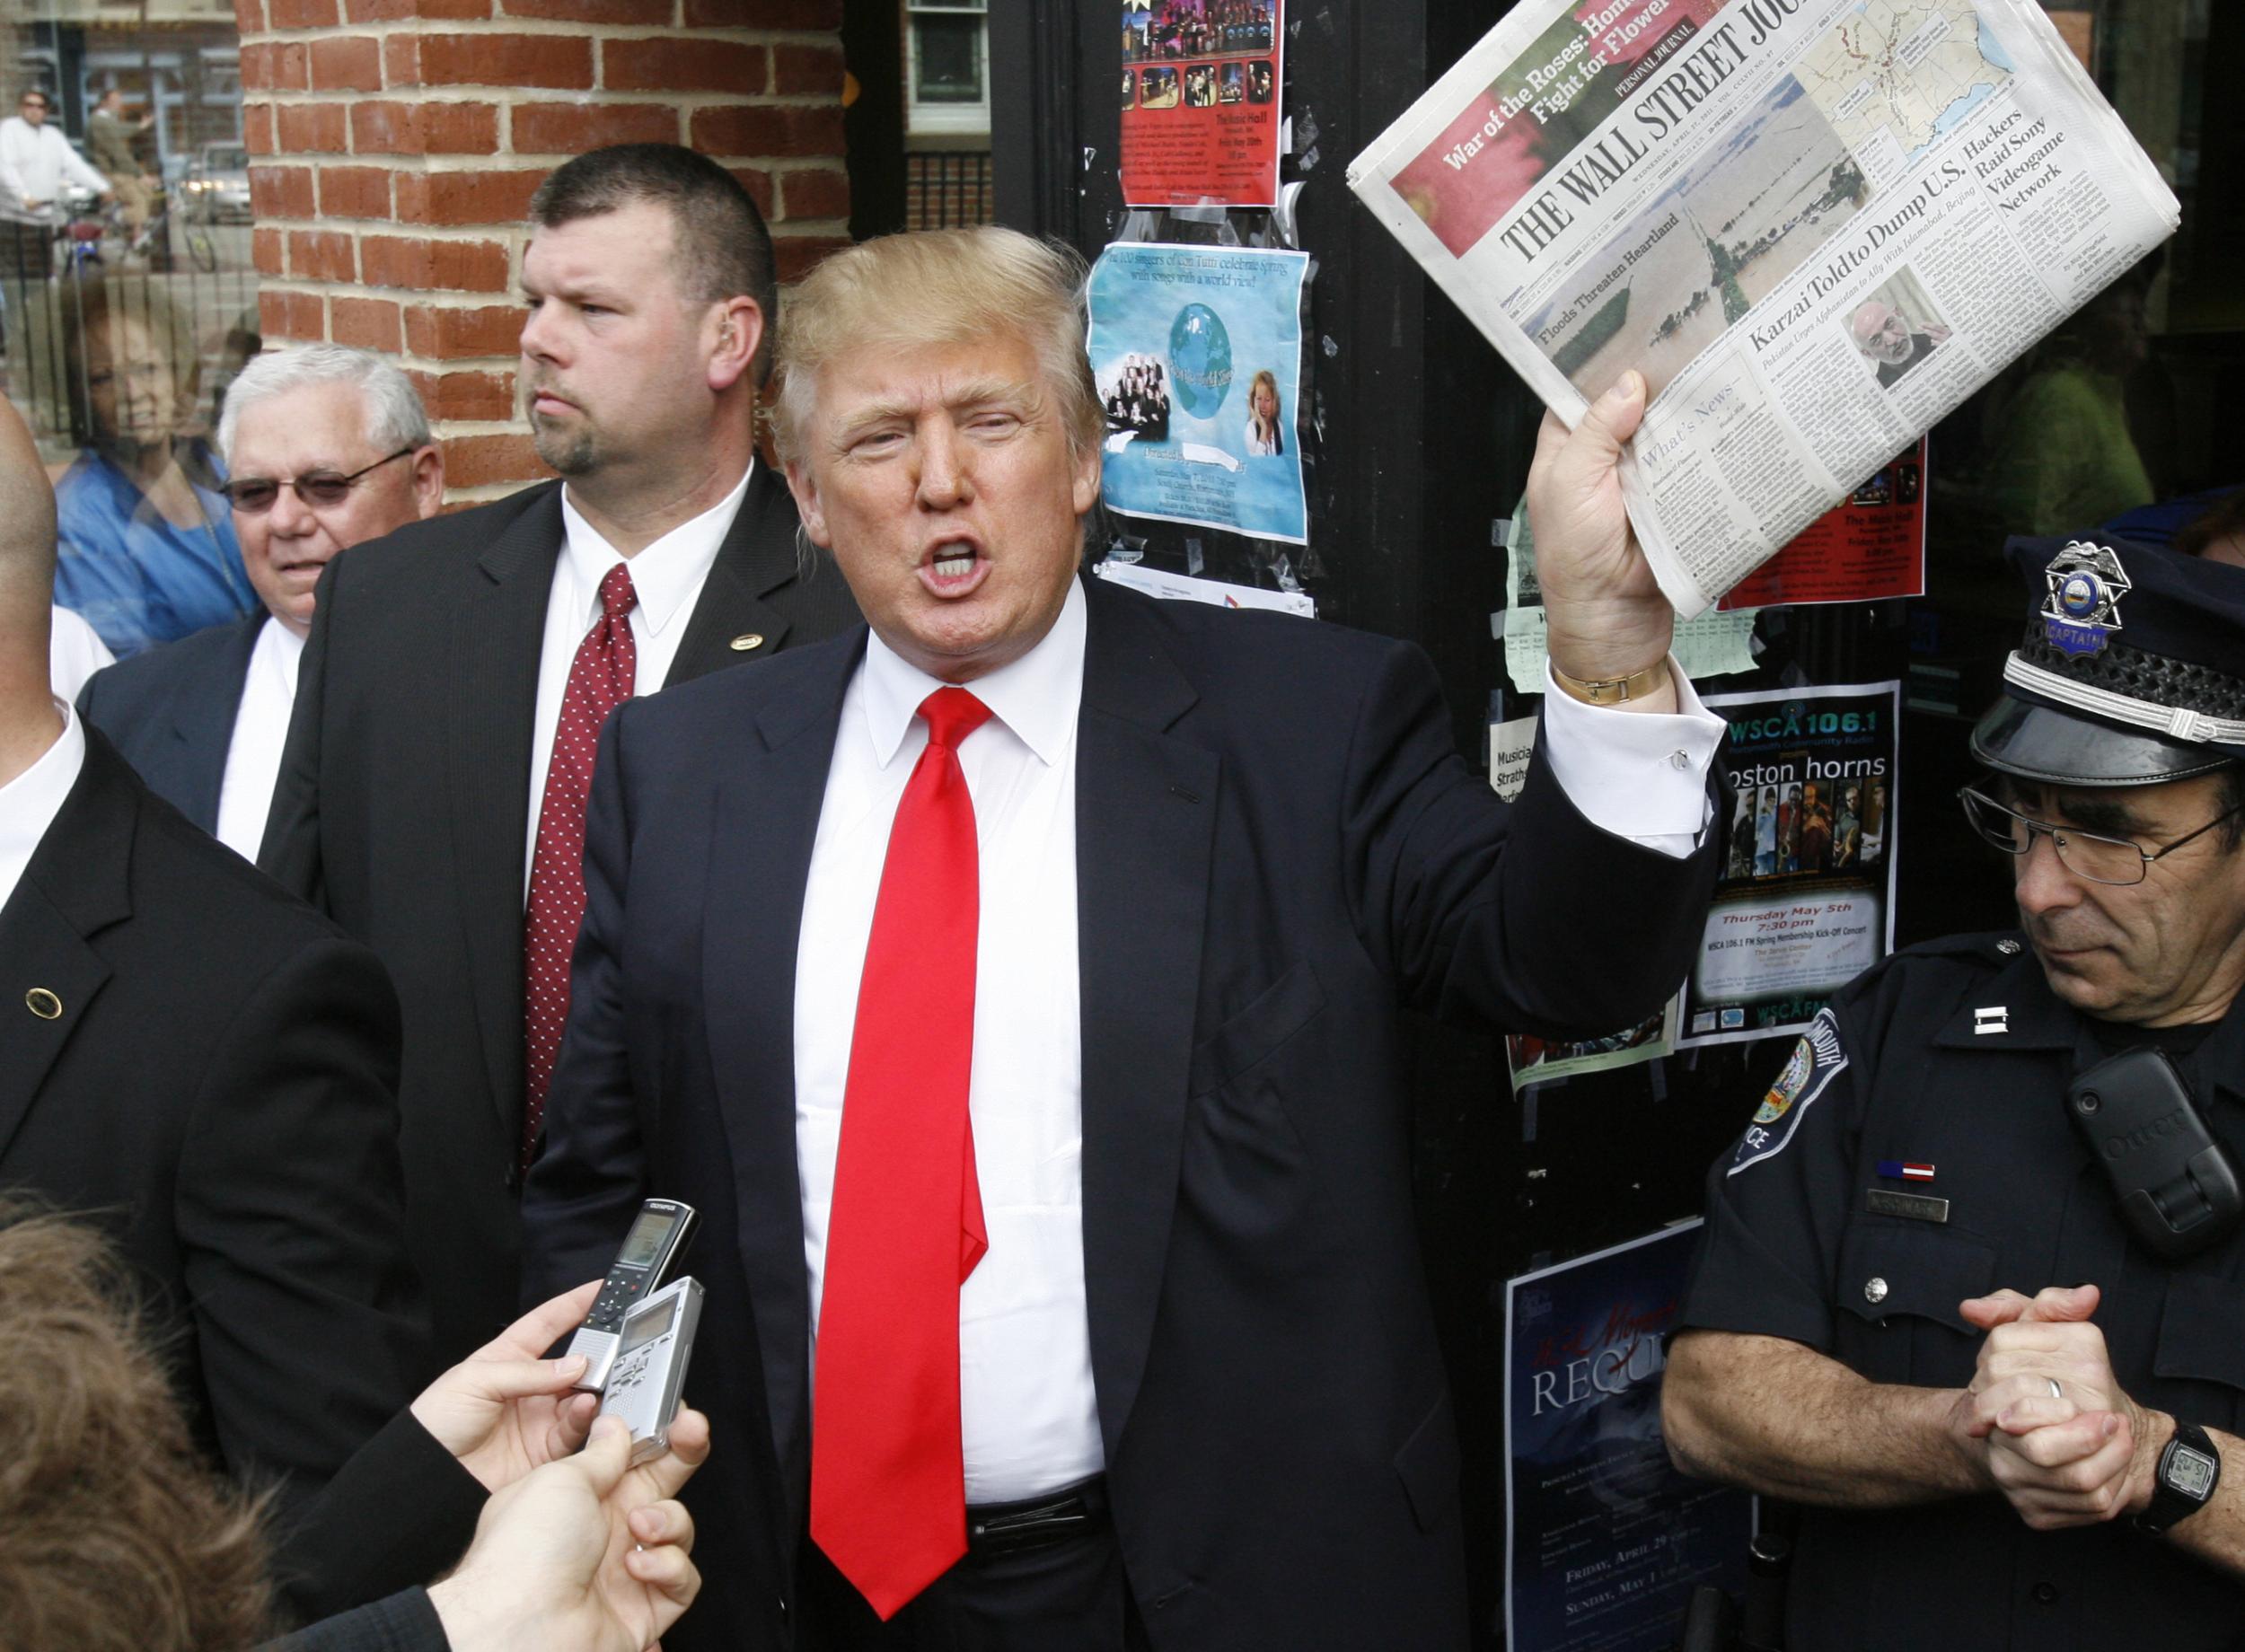 Over 100 newspapers to publish damning editorials against Donald Trump&apos;s attacks on the press